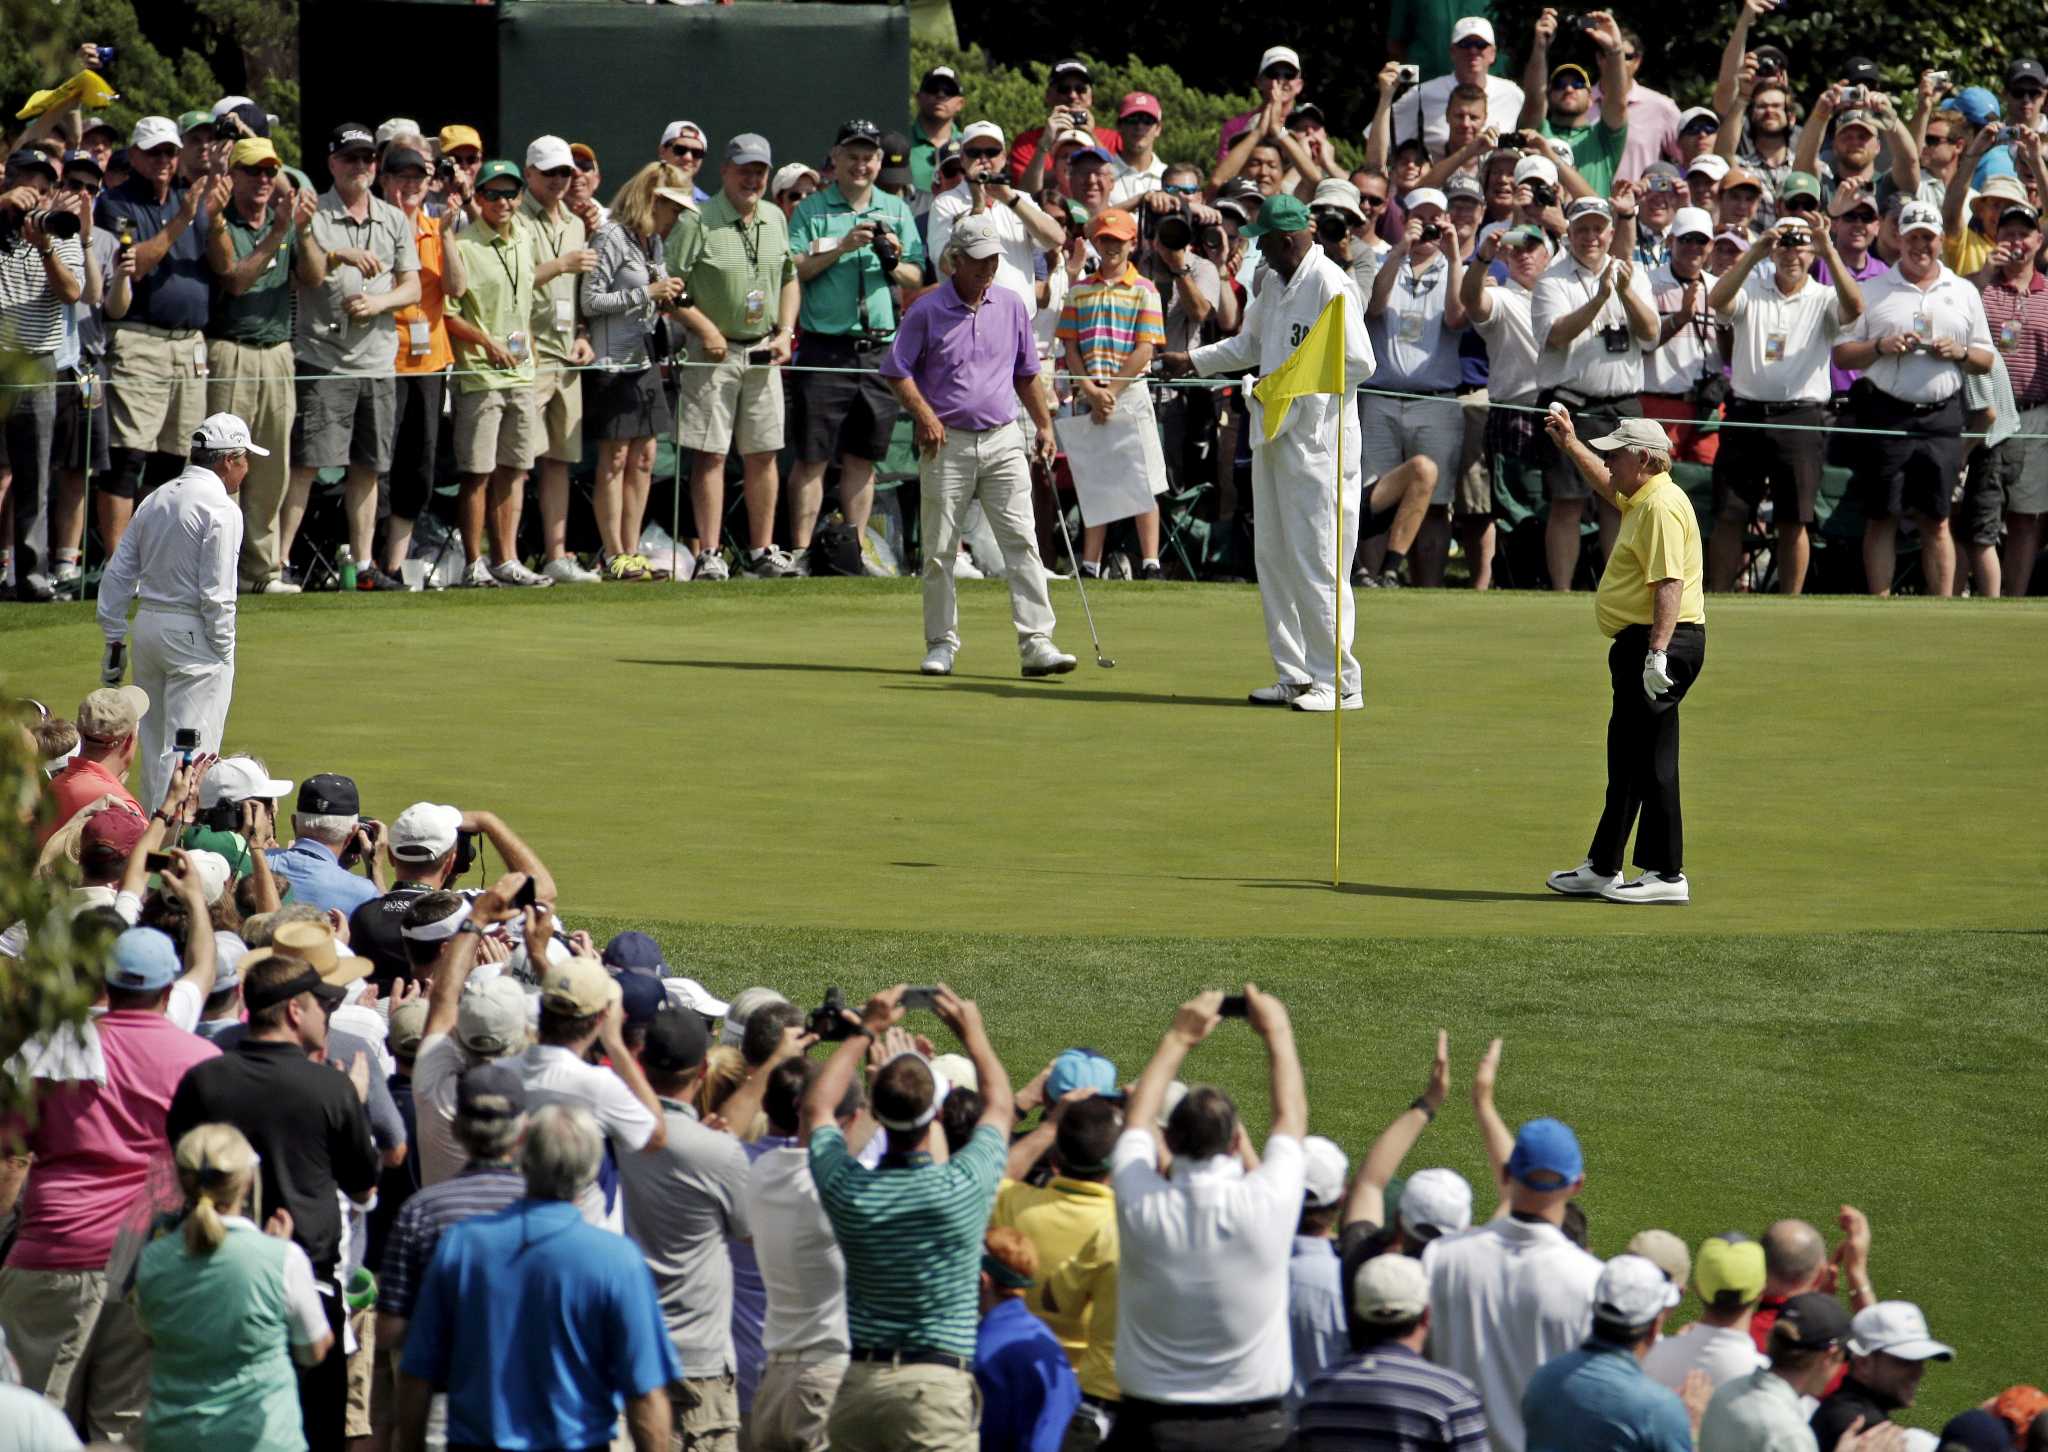 Jack Nicklaus makes holeinone in Masters Par 3 Contest